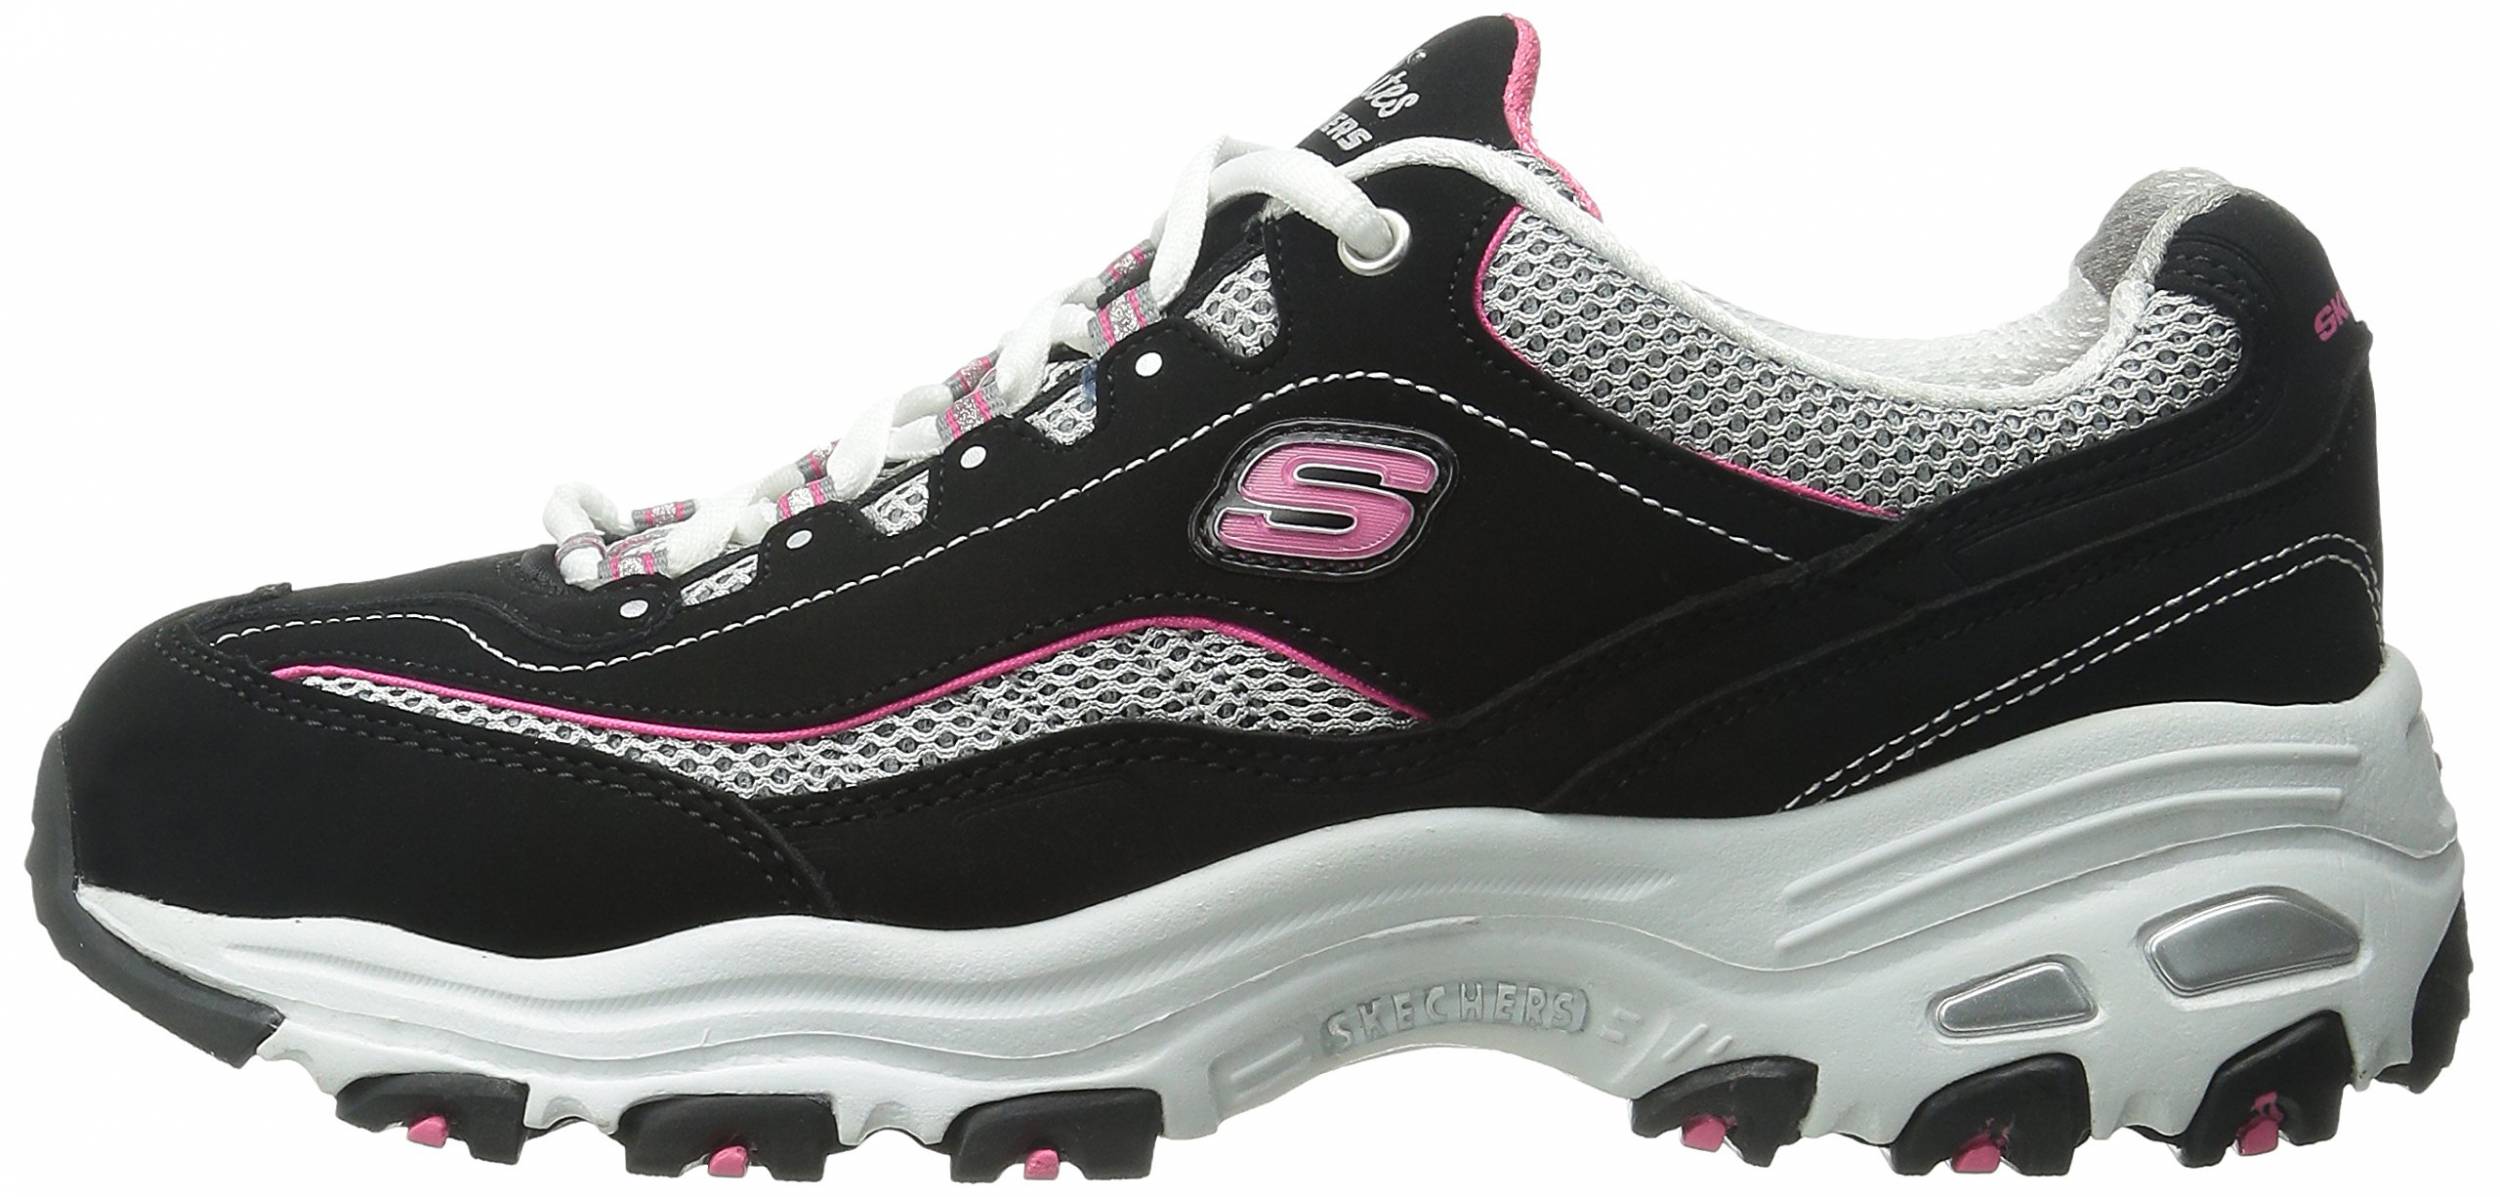 skechers womens athletic shoes